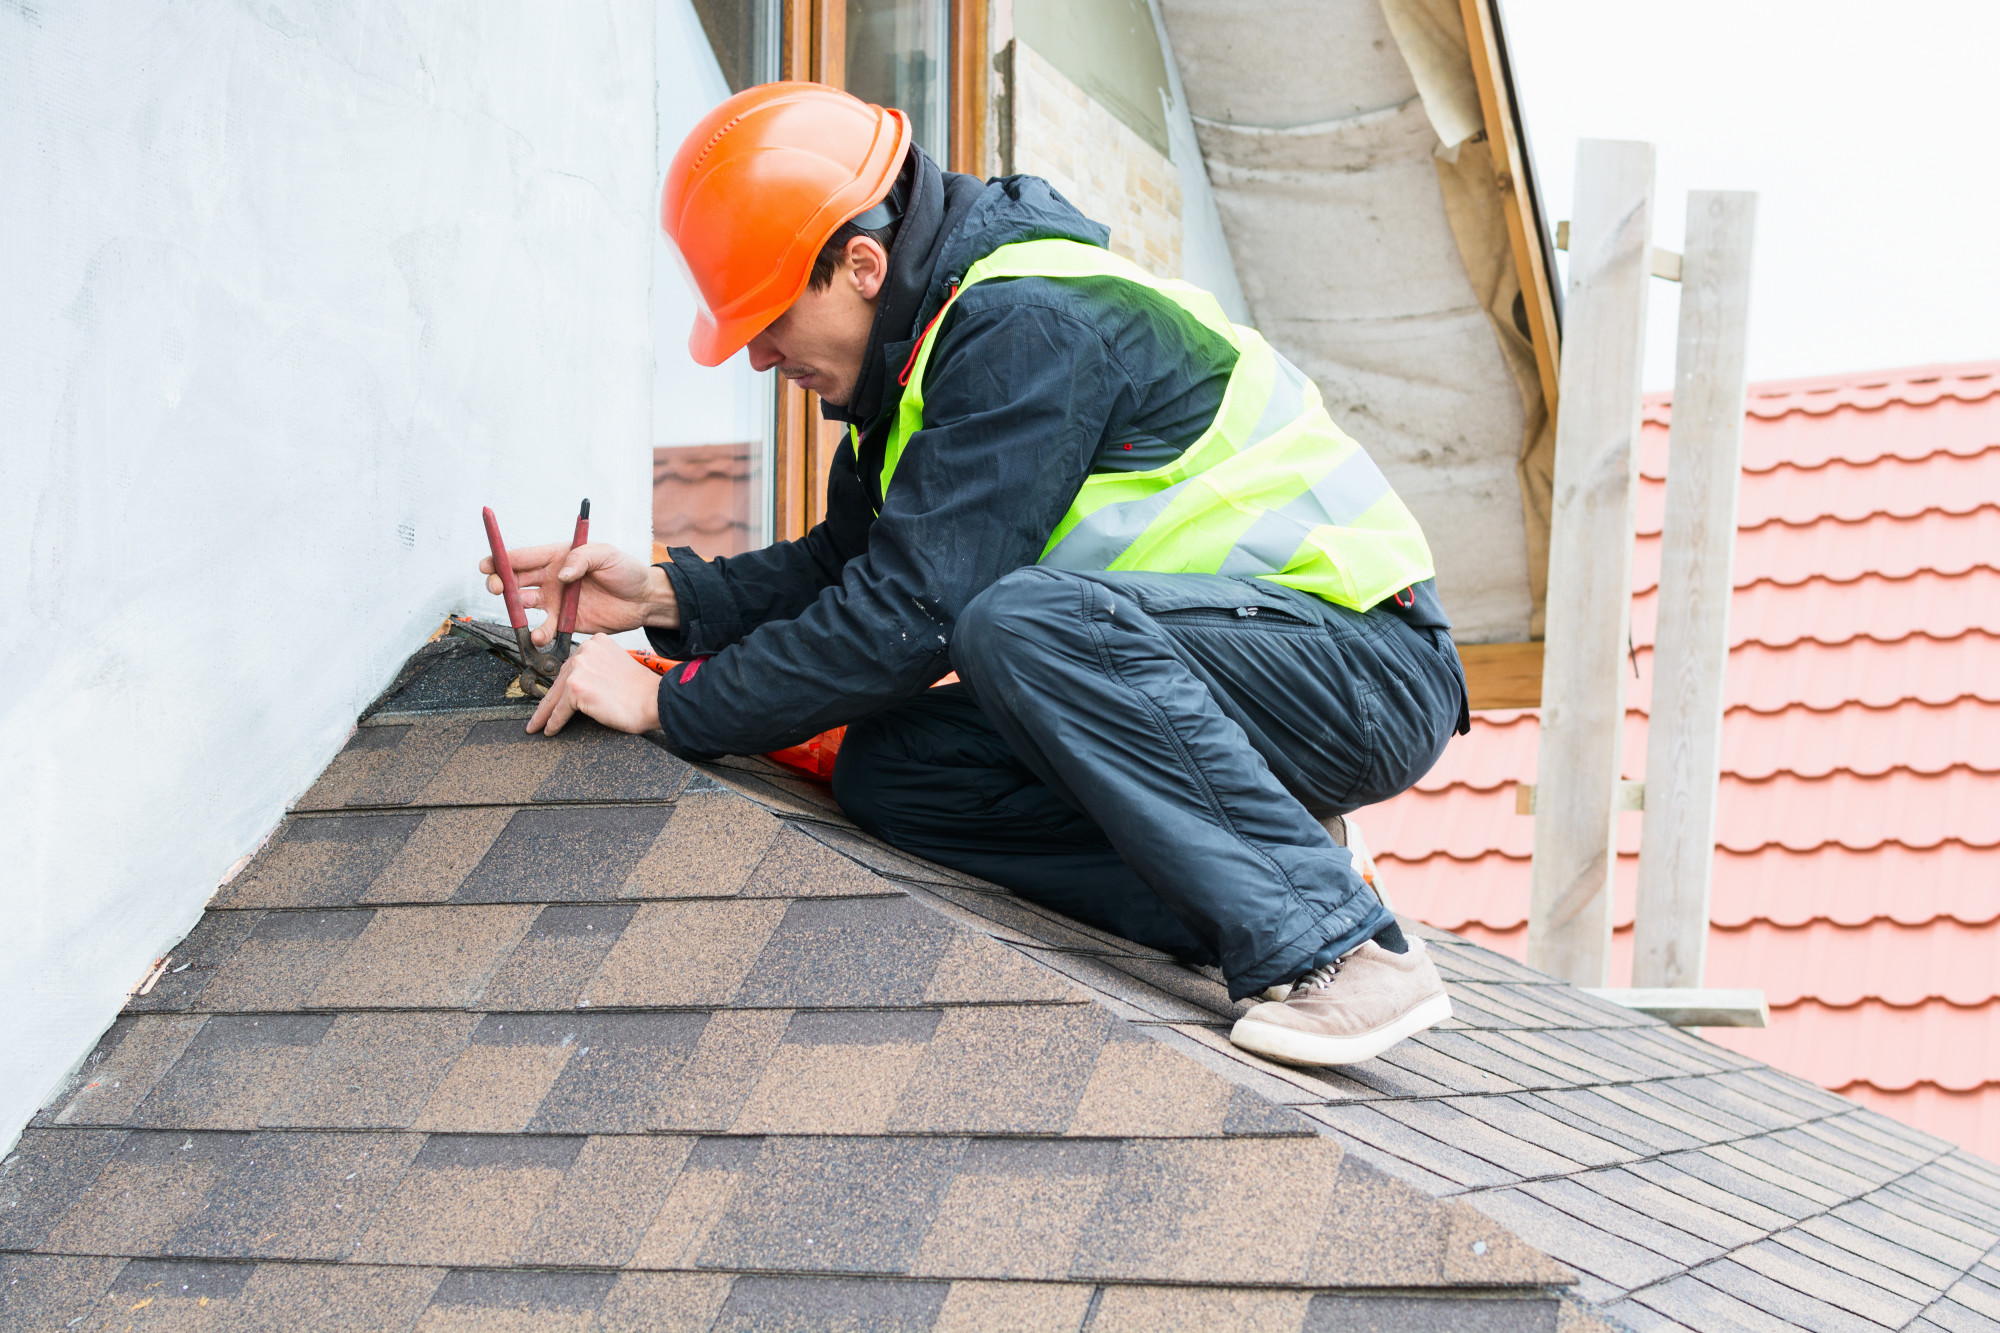 24/7 Local Roofers in New Orleans, LA: Comprehensive Roofing Services for Repair, Replacement, Installation, and Maintenance